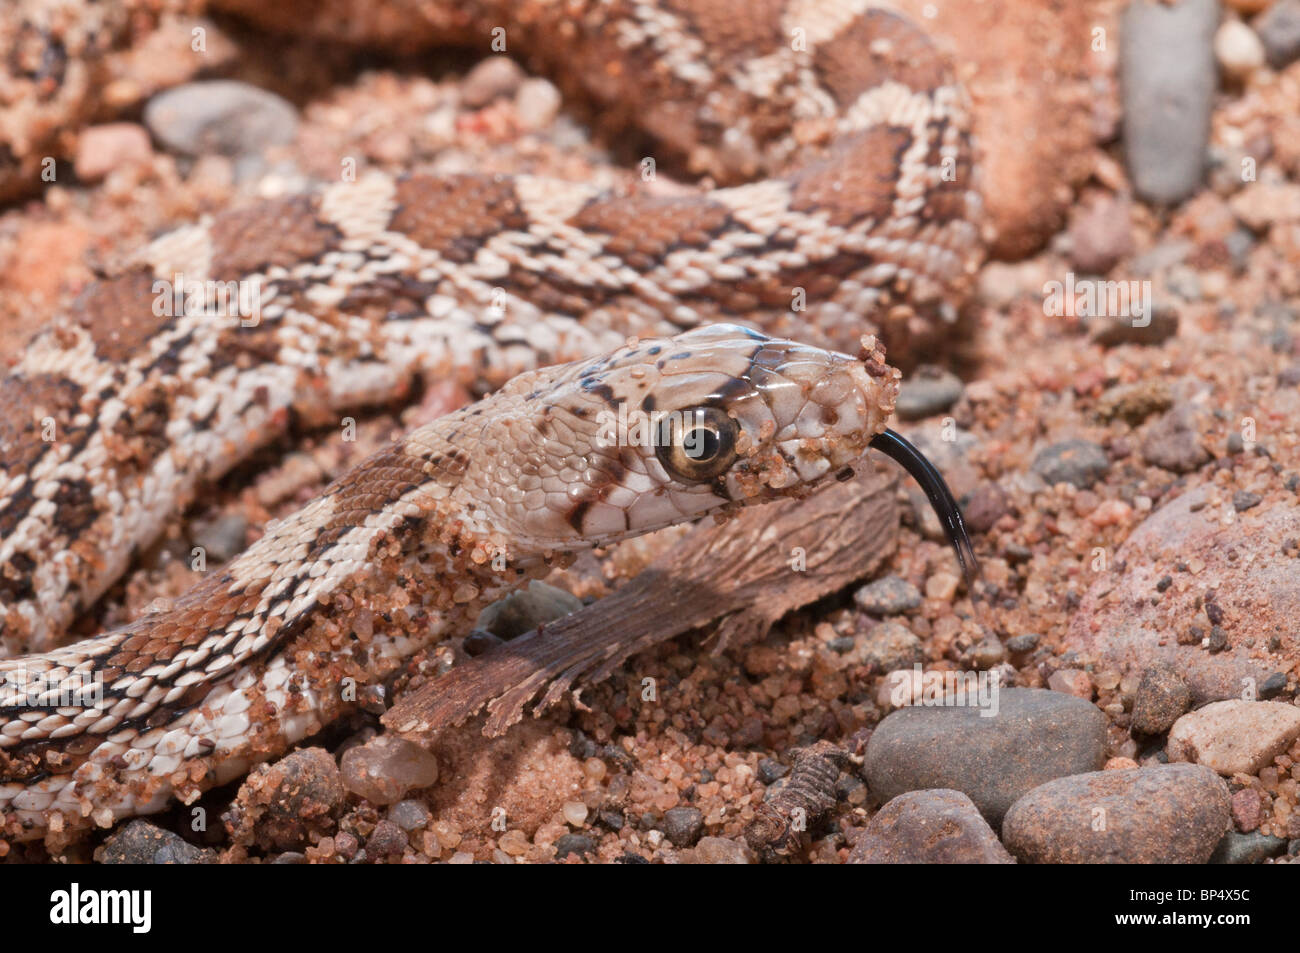 Sonoran gopher snake, Pituophis catenifer affinis, native to southwestern United States Stock Photo